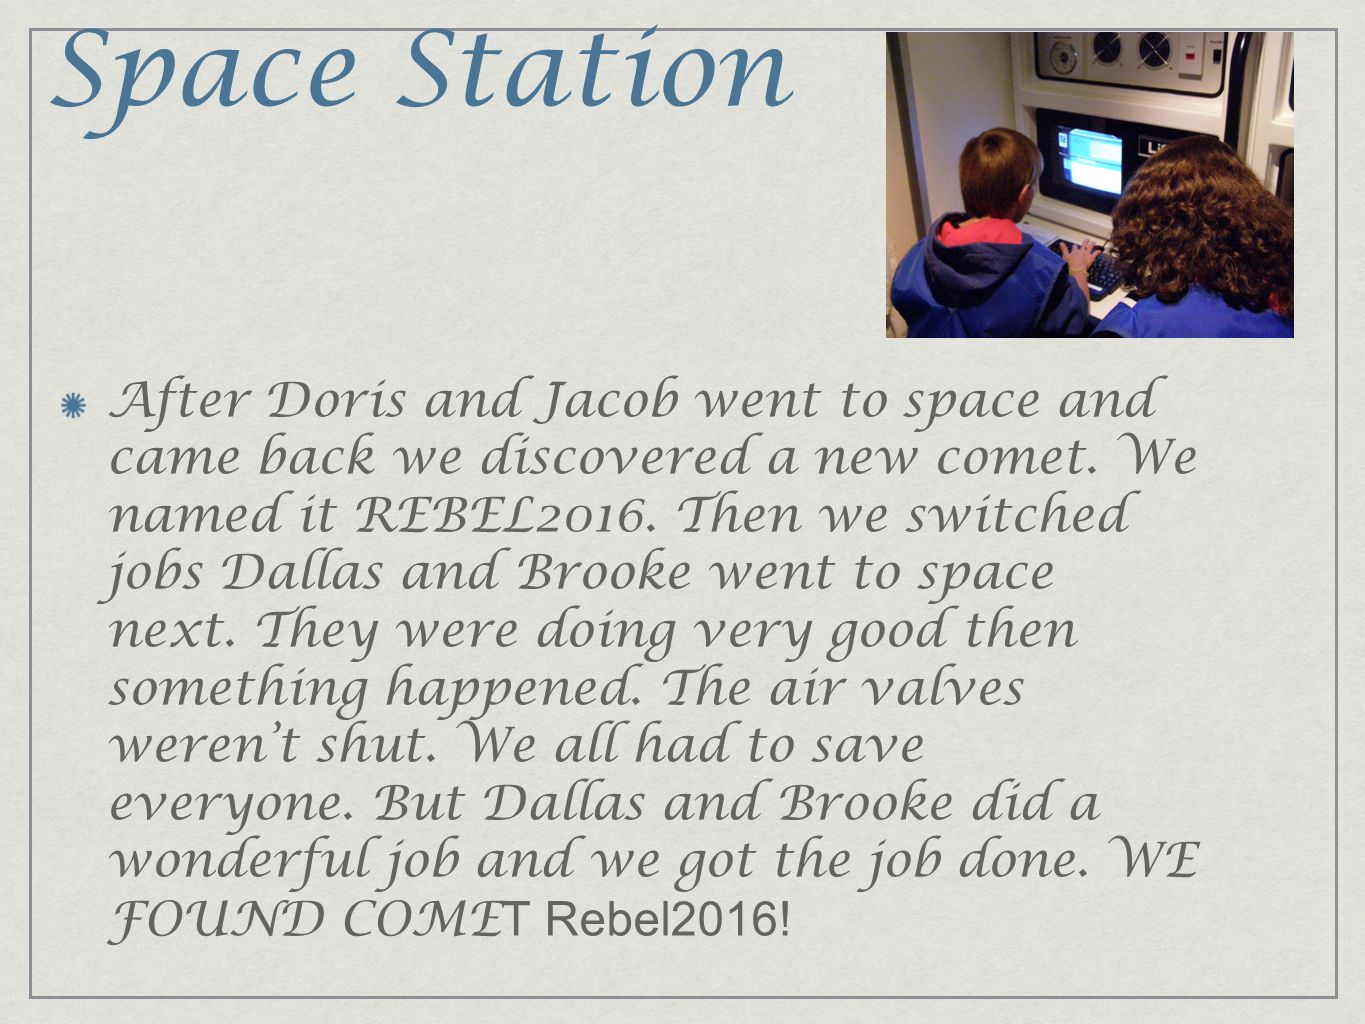 Space Station After Doris and Jacob went to space and came back we discovered a new comet.